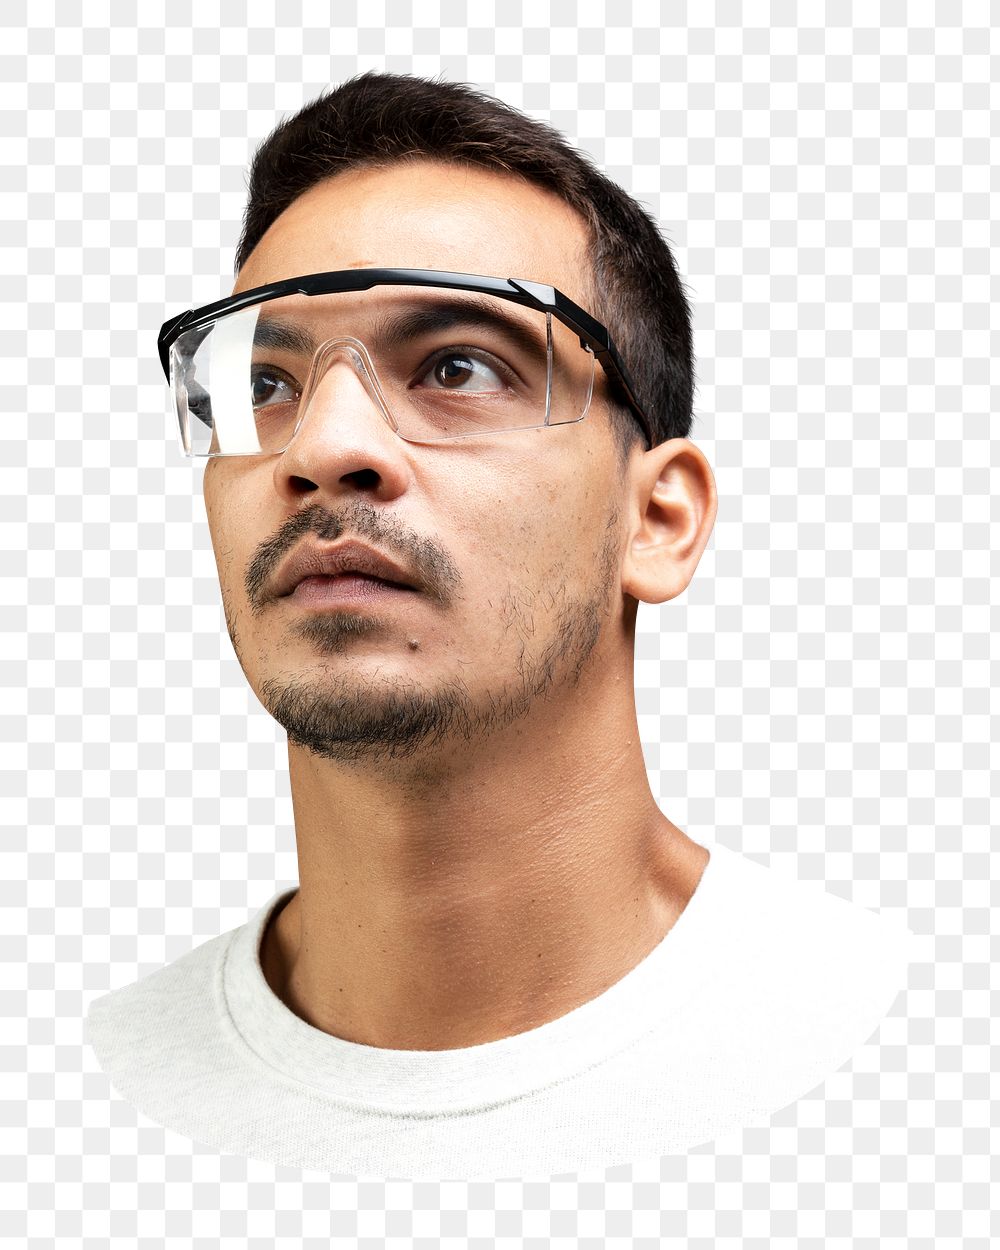 Man with smart glasses png, transparent background